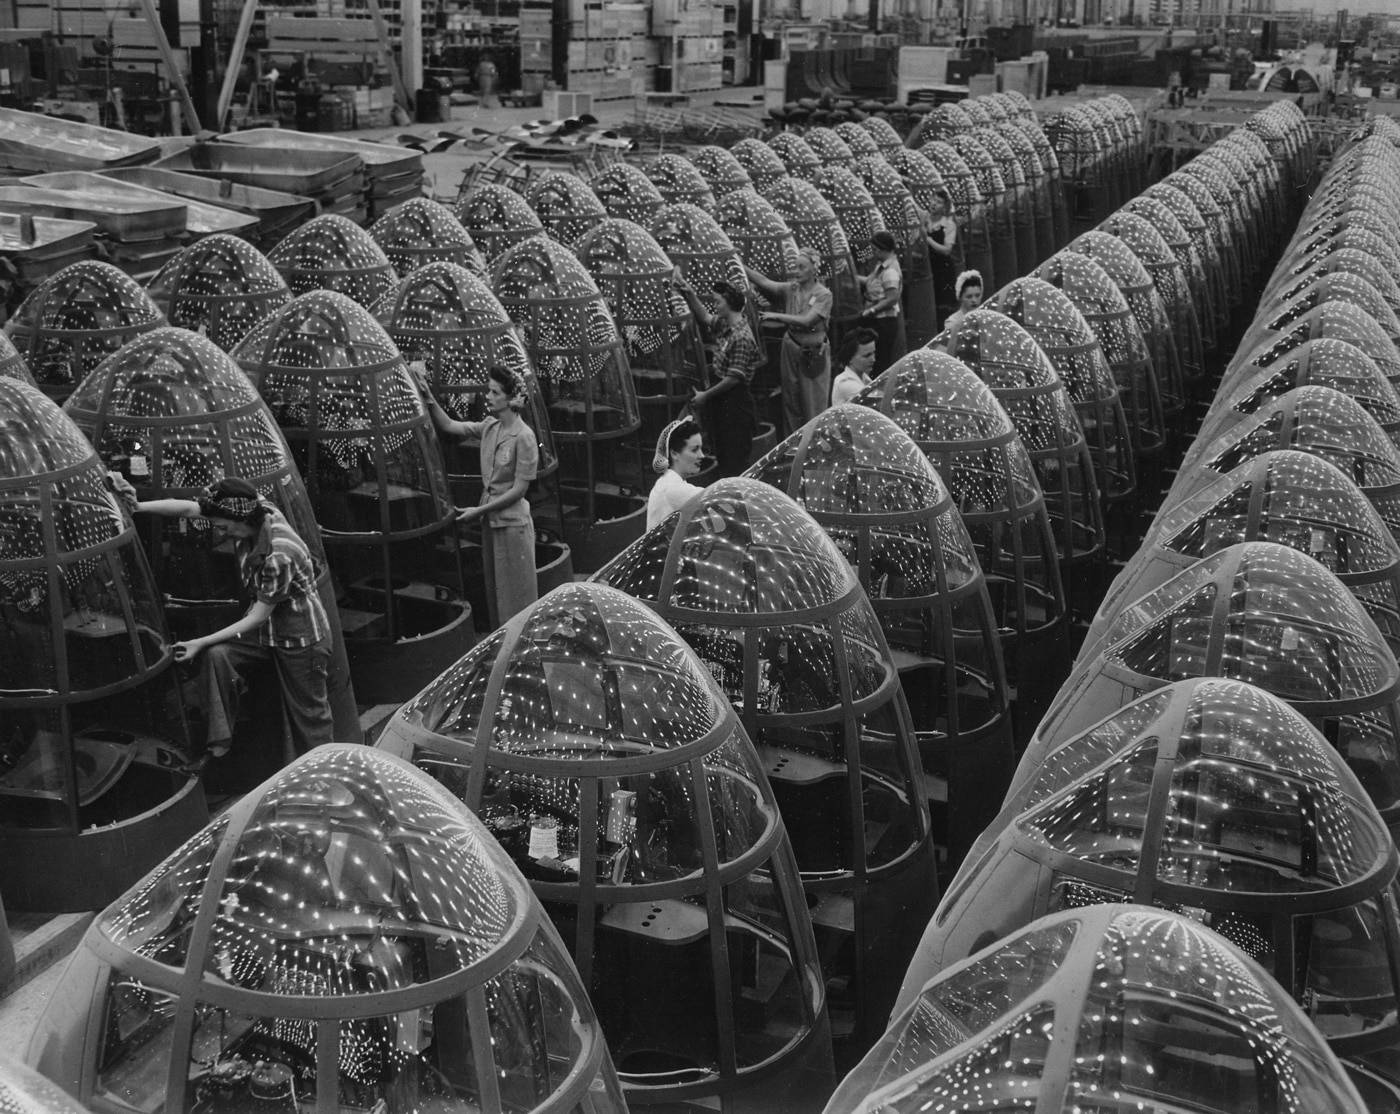 Shown here are rows of A-20 nose glass construction during World War II in California. The plexiglas reflects the overhead lights. 